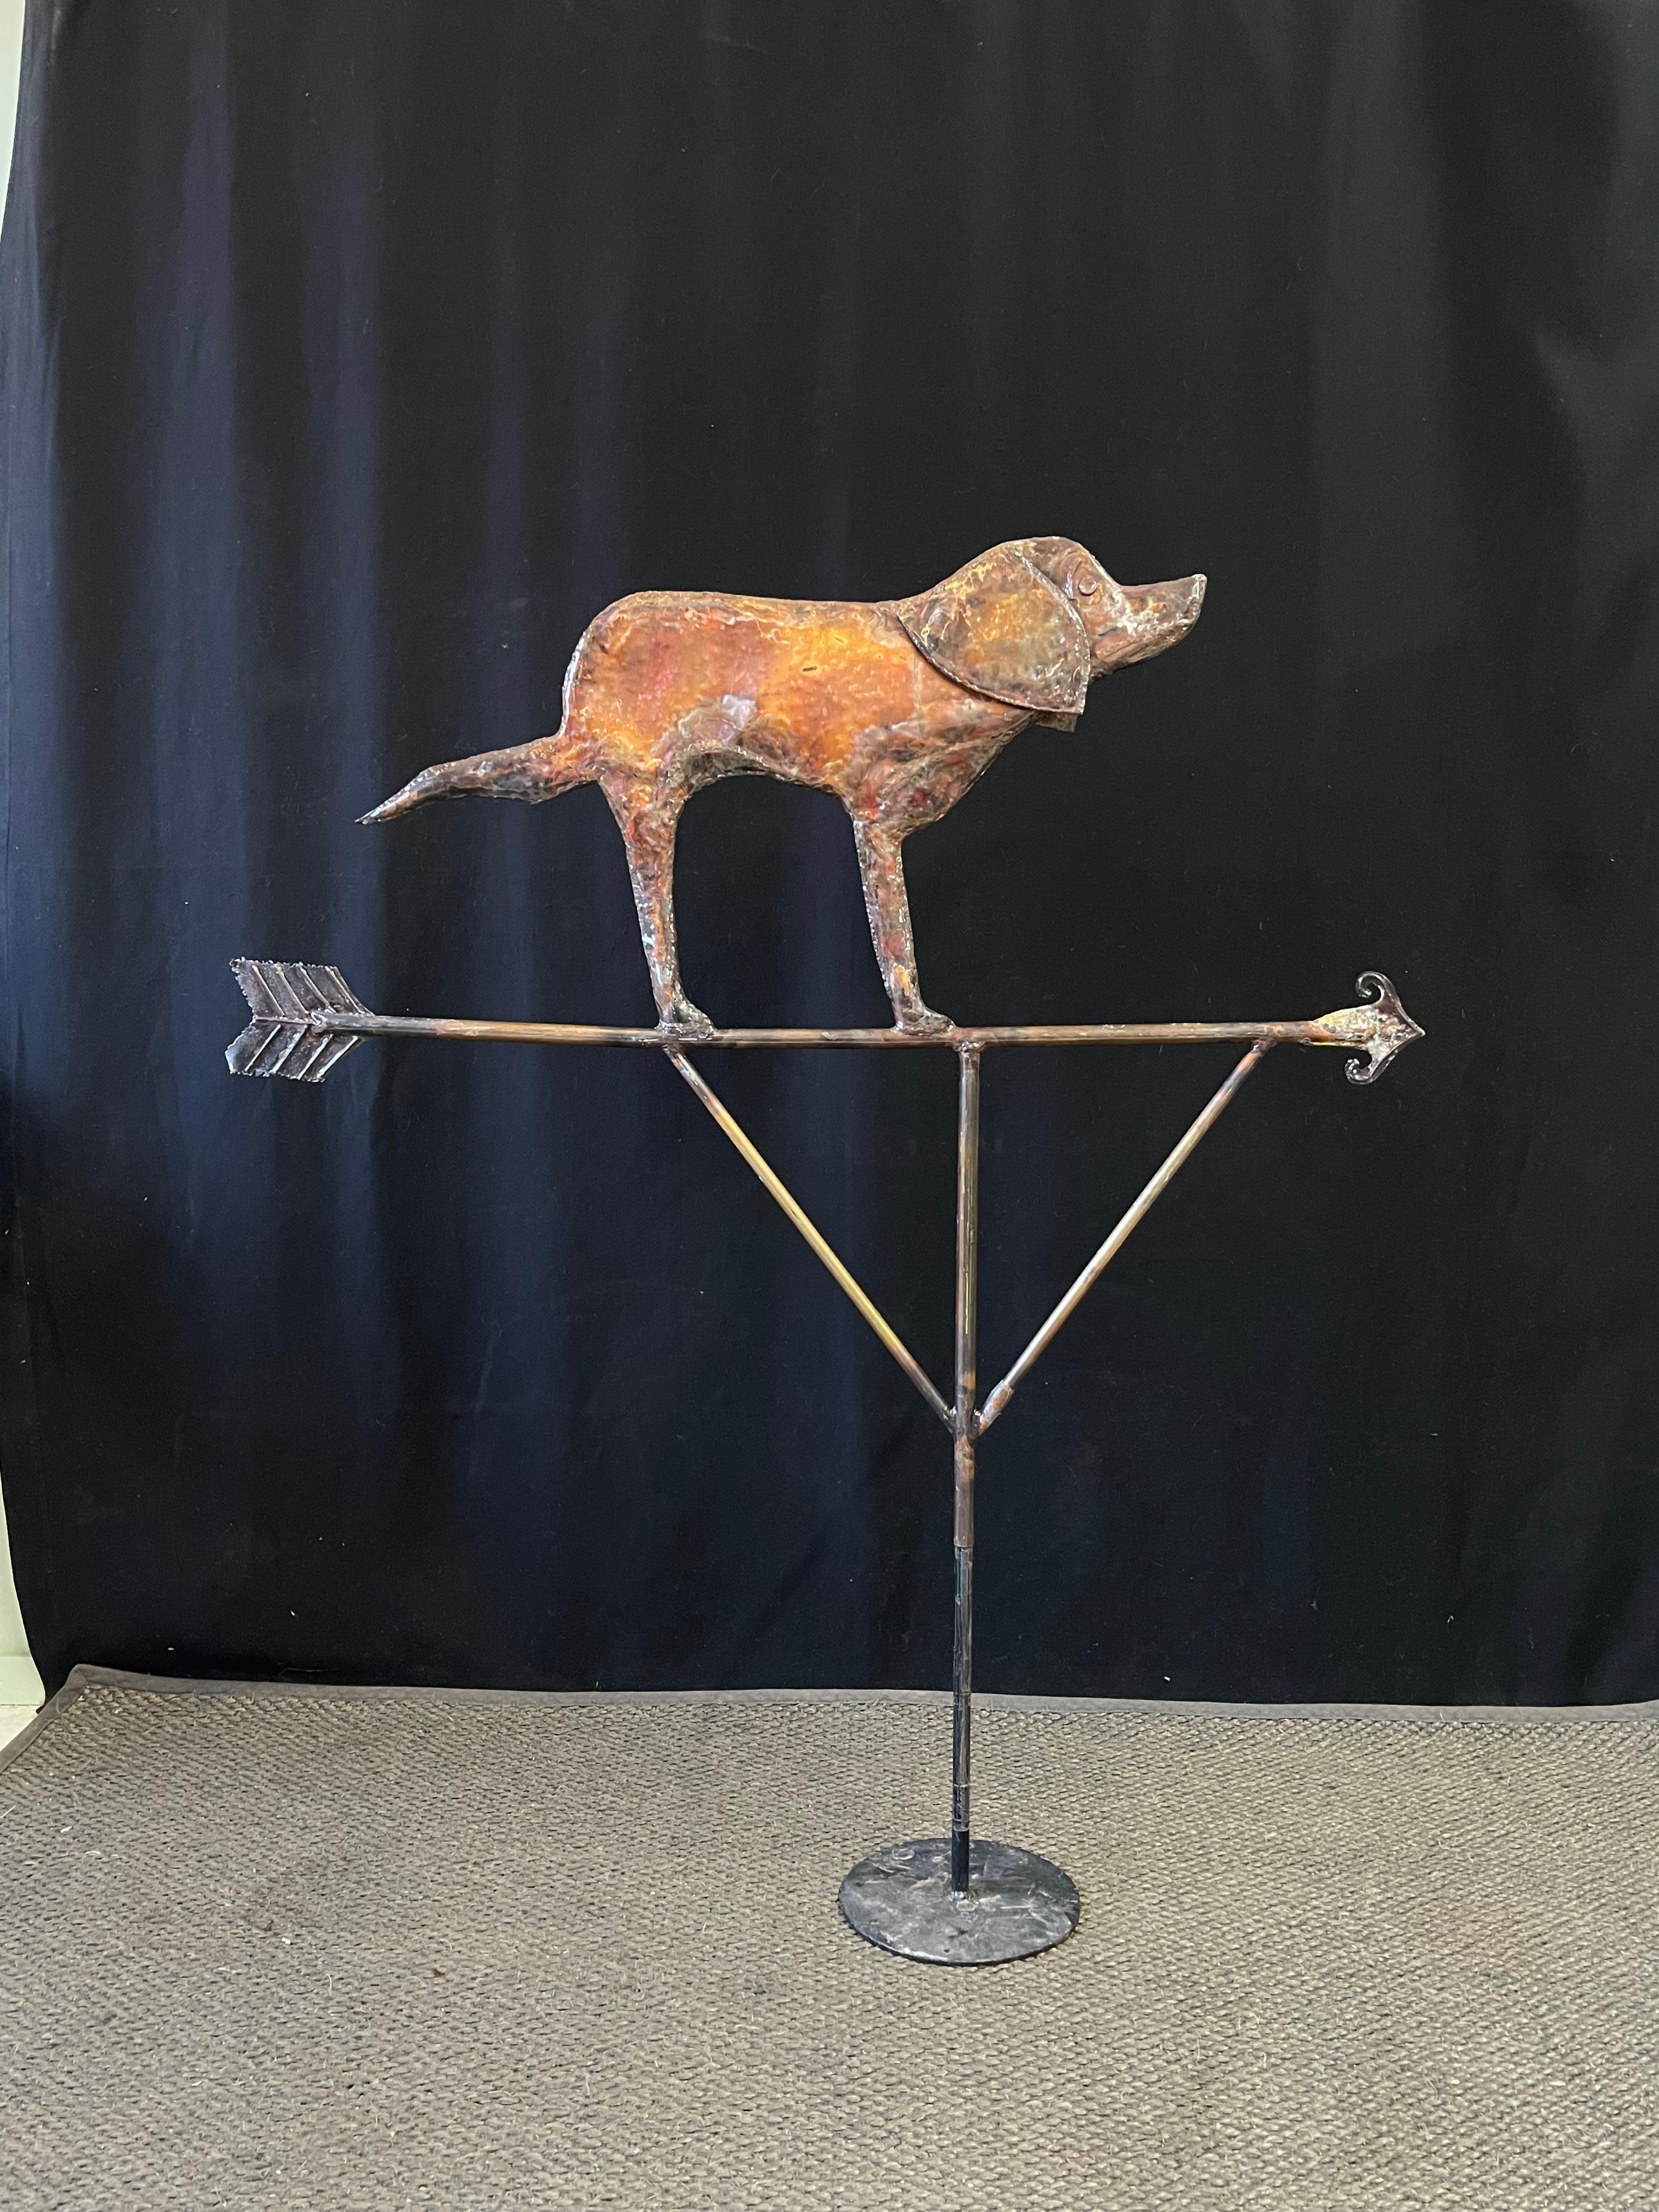 20th Century American Folk Art Weathervane artisan made from copper with an adorable dog perched atop the arrow. Amazing facial details and a natural aged patina bring all the charm to this one-of-a-kind New England piece of Americana! 

The